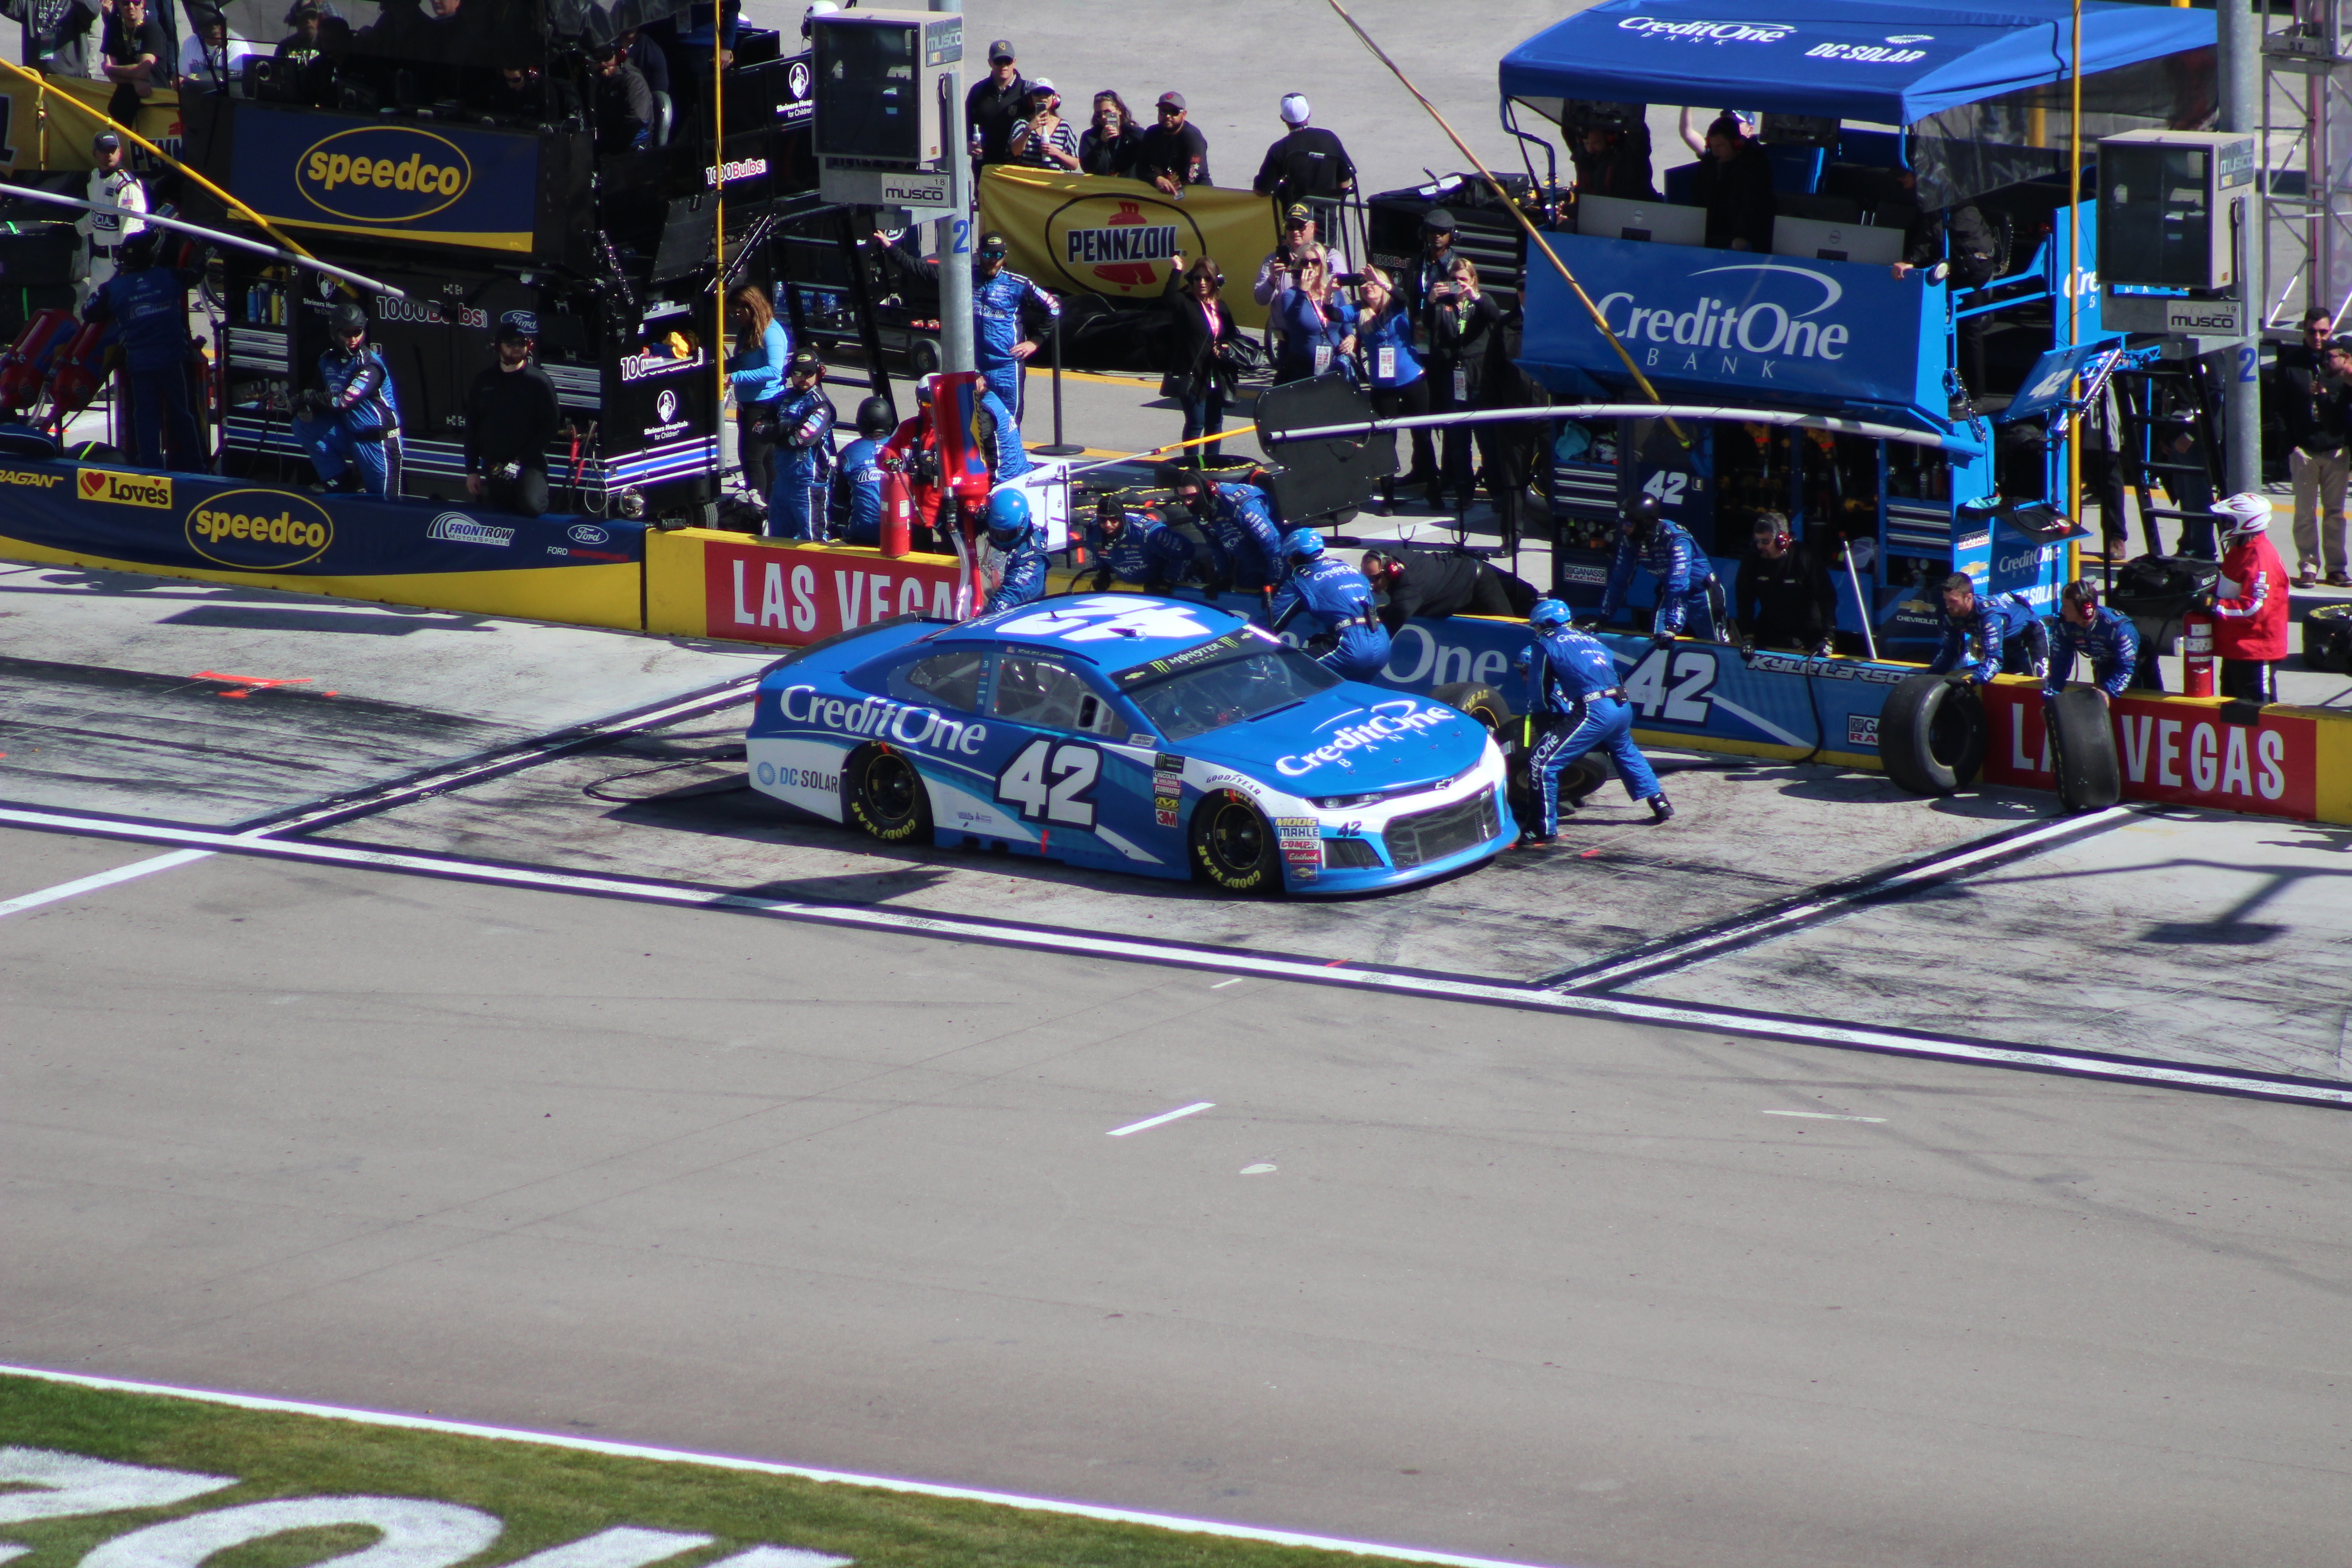 All told, Larson looks to capitalize on pit stops this year. (Photo Credit: Jose L. Acero Jr/TPF)